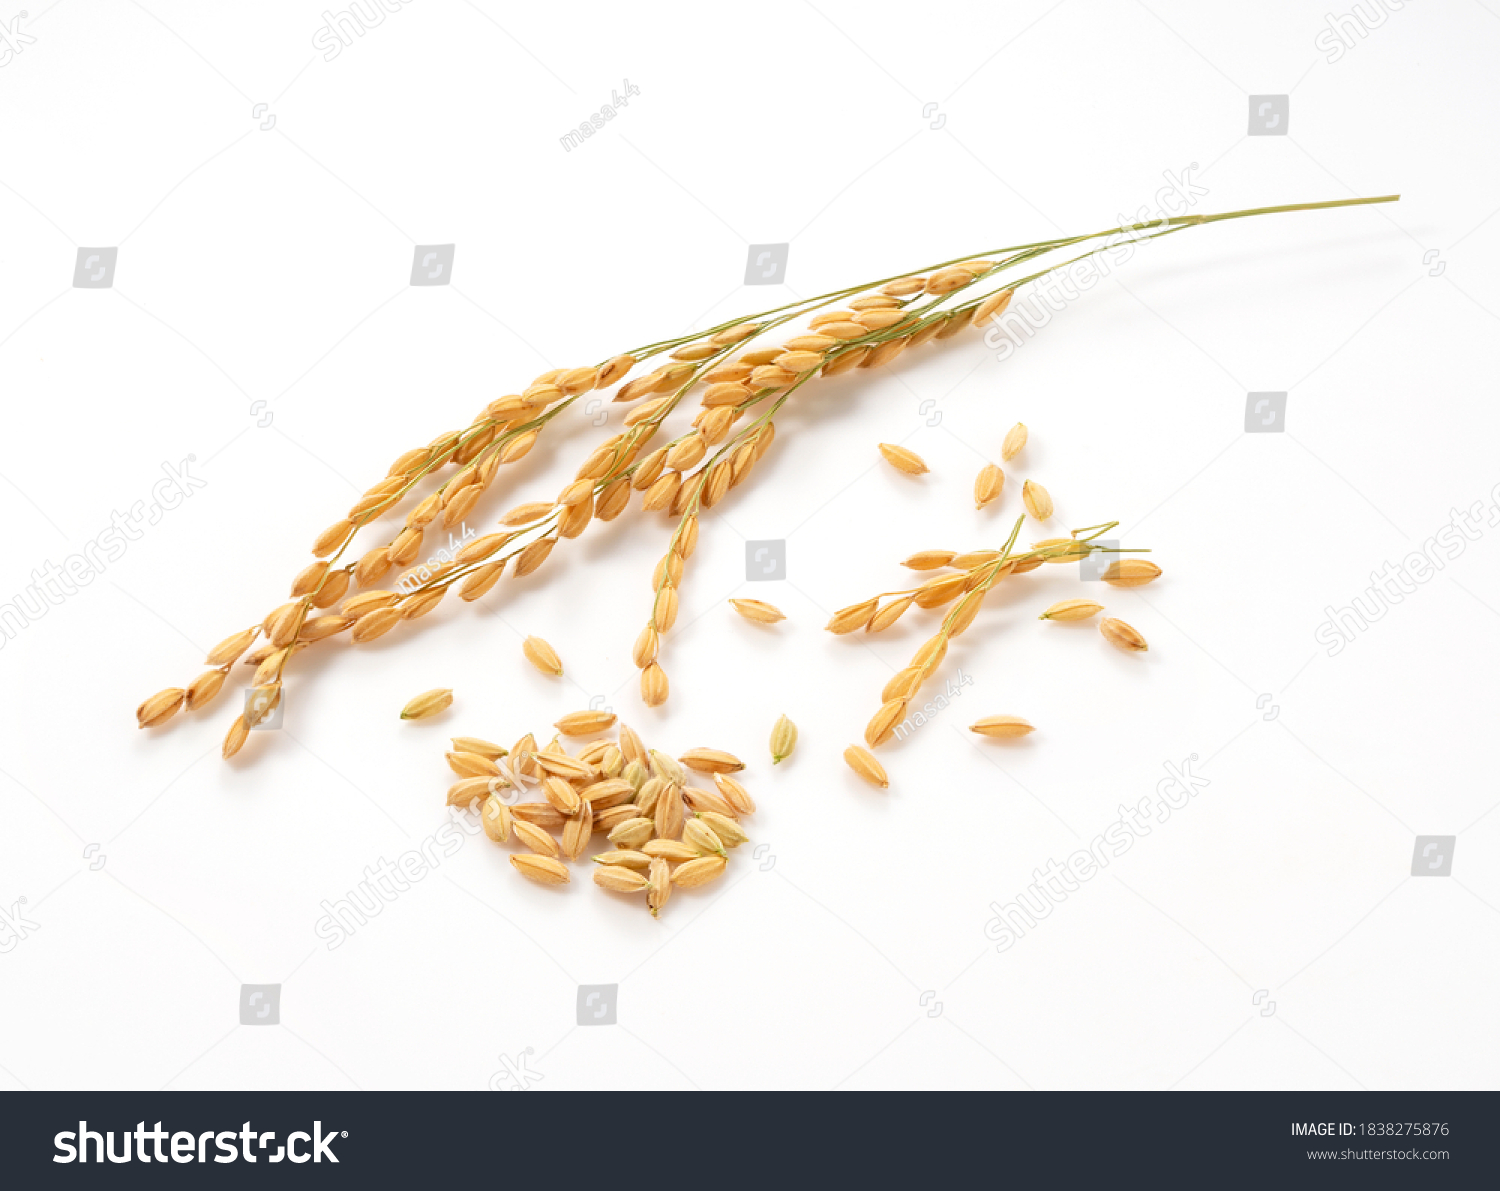 Close-up of an ear of rice on a white background #1838275876